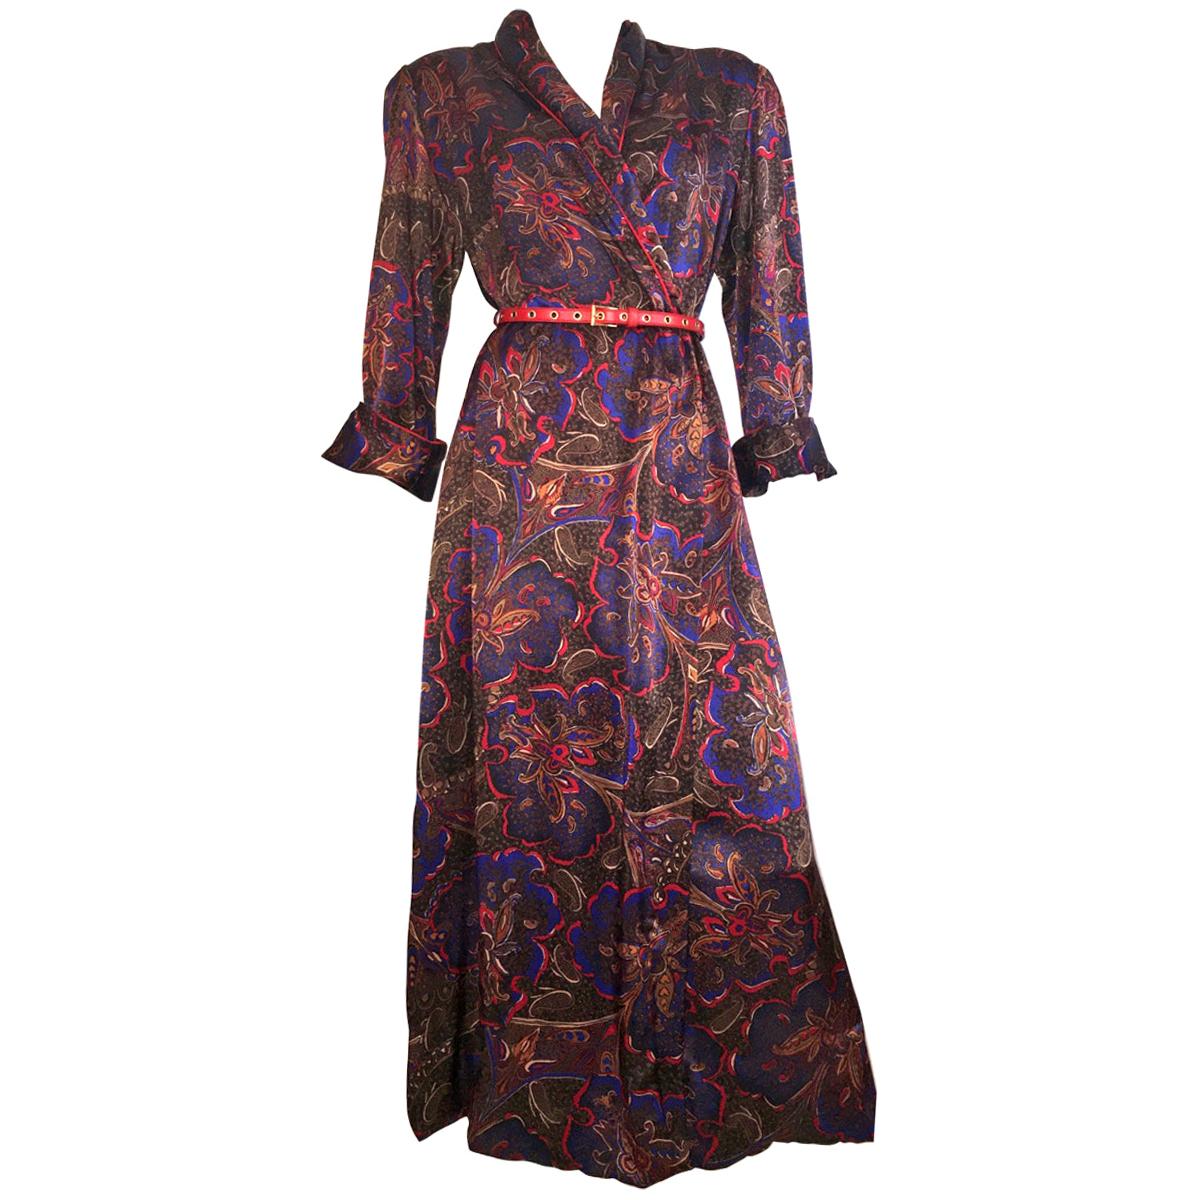 Bill Blass for Neiman Marcus 1980s Paisley Wrap Dress with Pockets Size Medium. For Sale